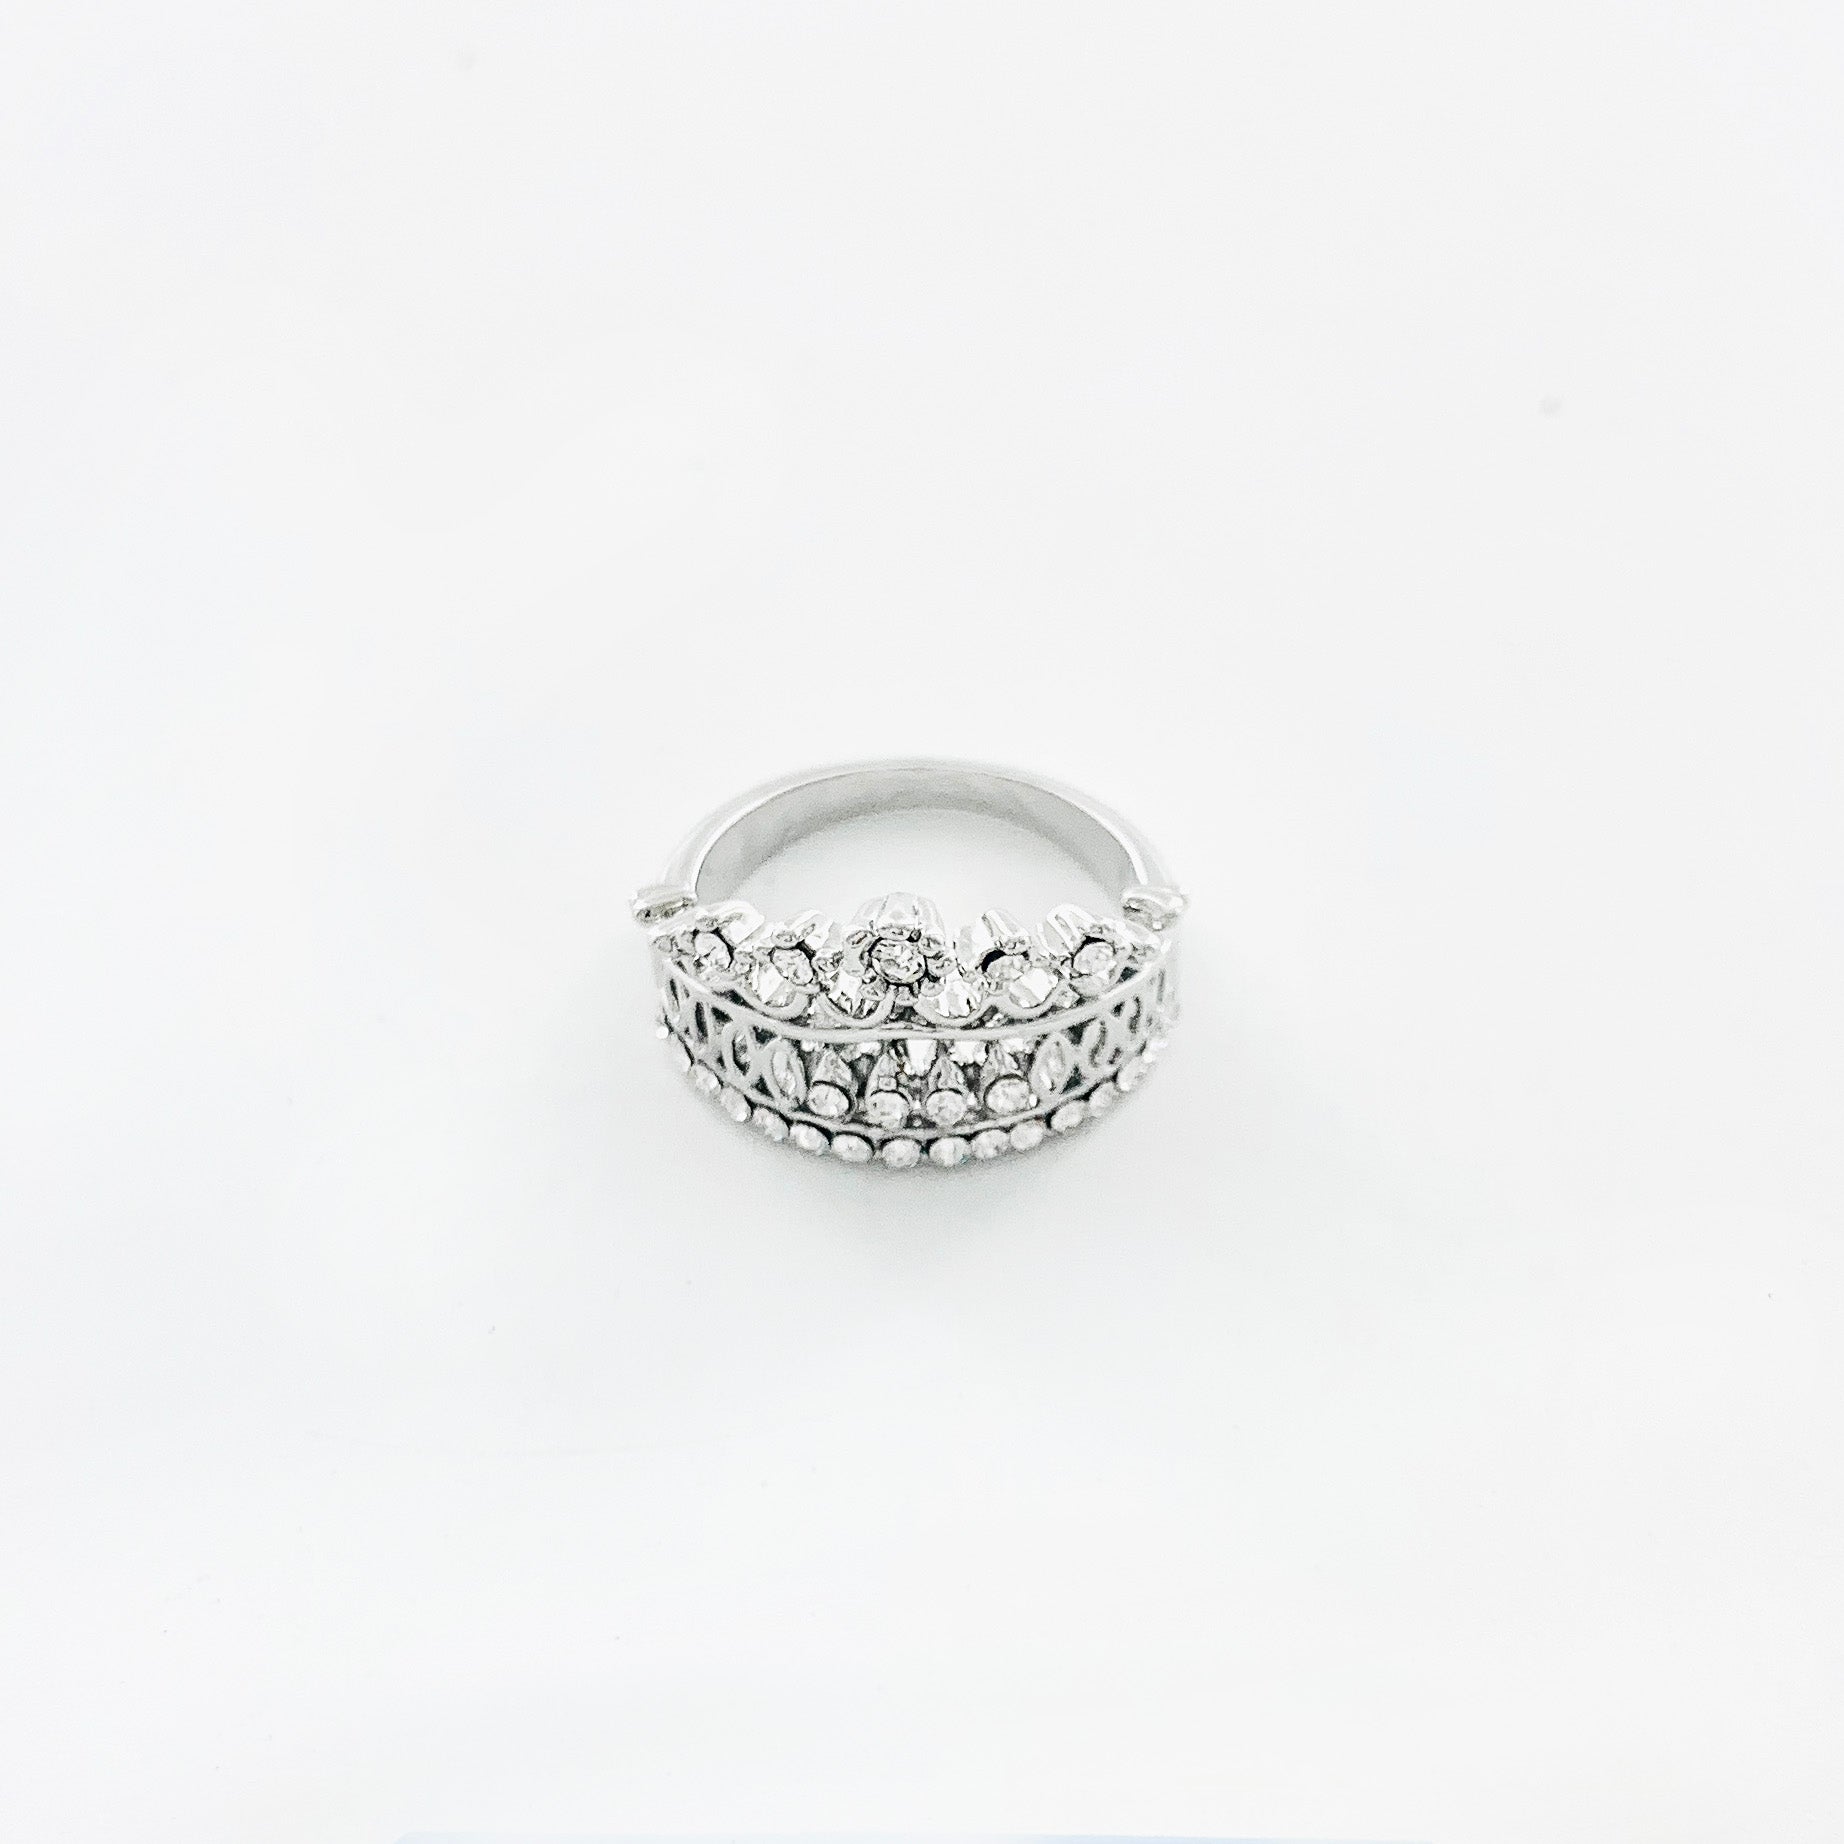 Silver crown ring design with layers of diamante stones